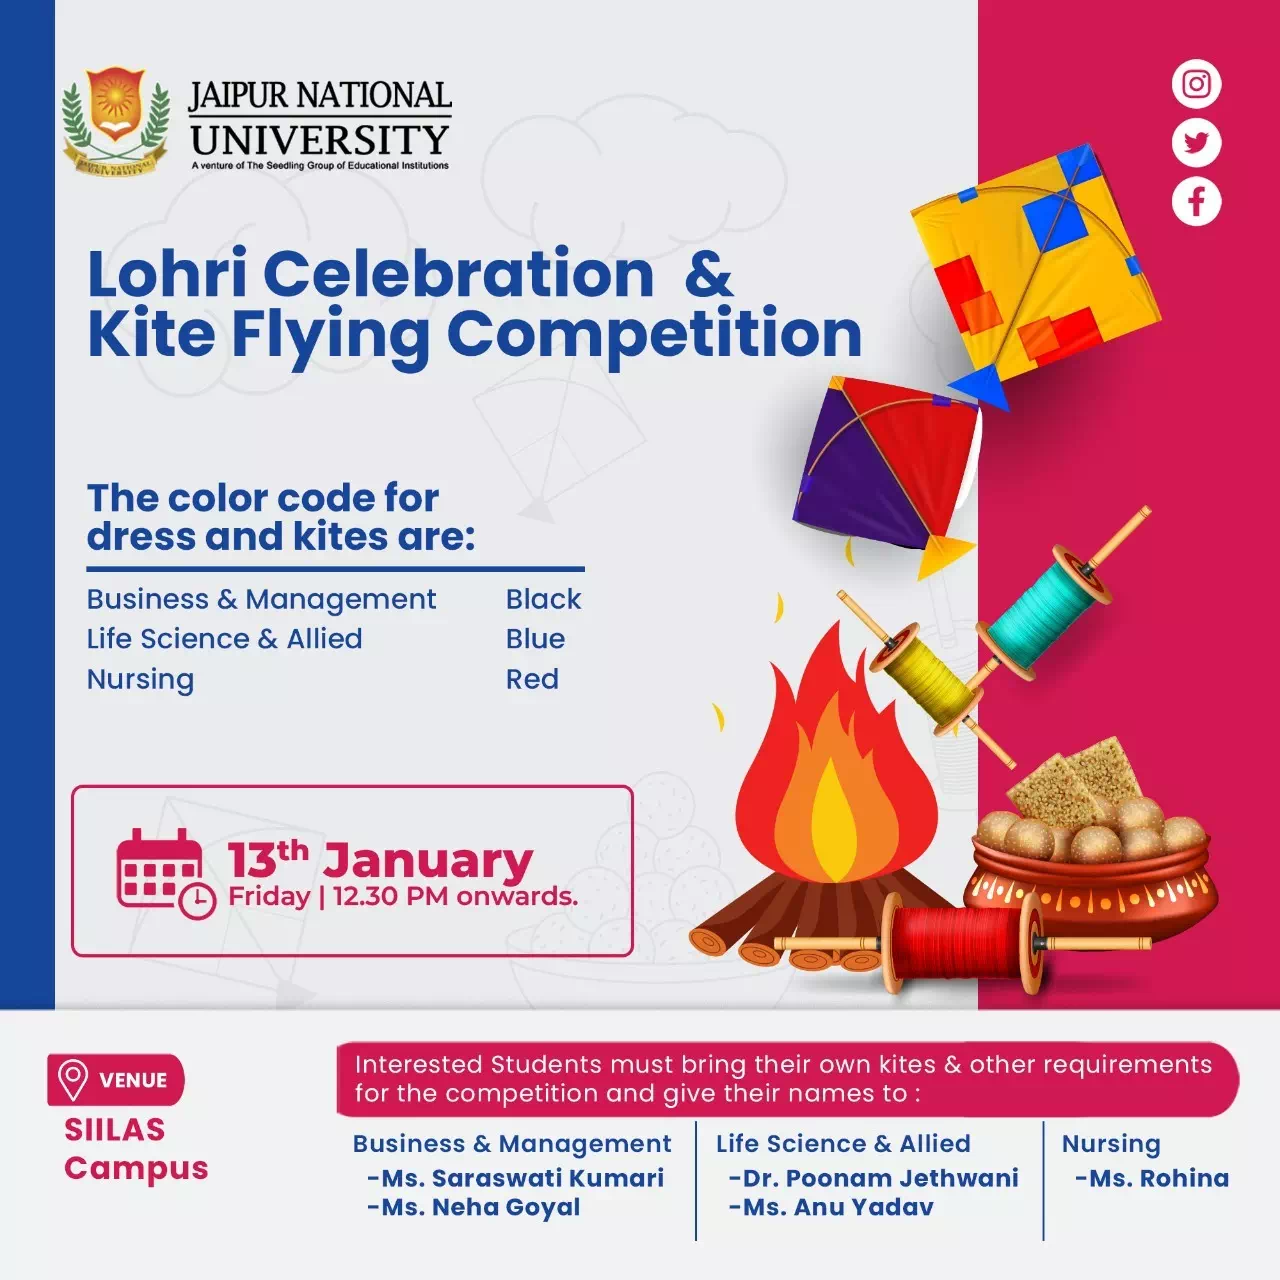 Lohri and Kite Flying Competition